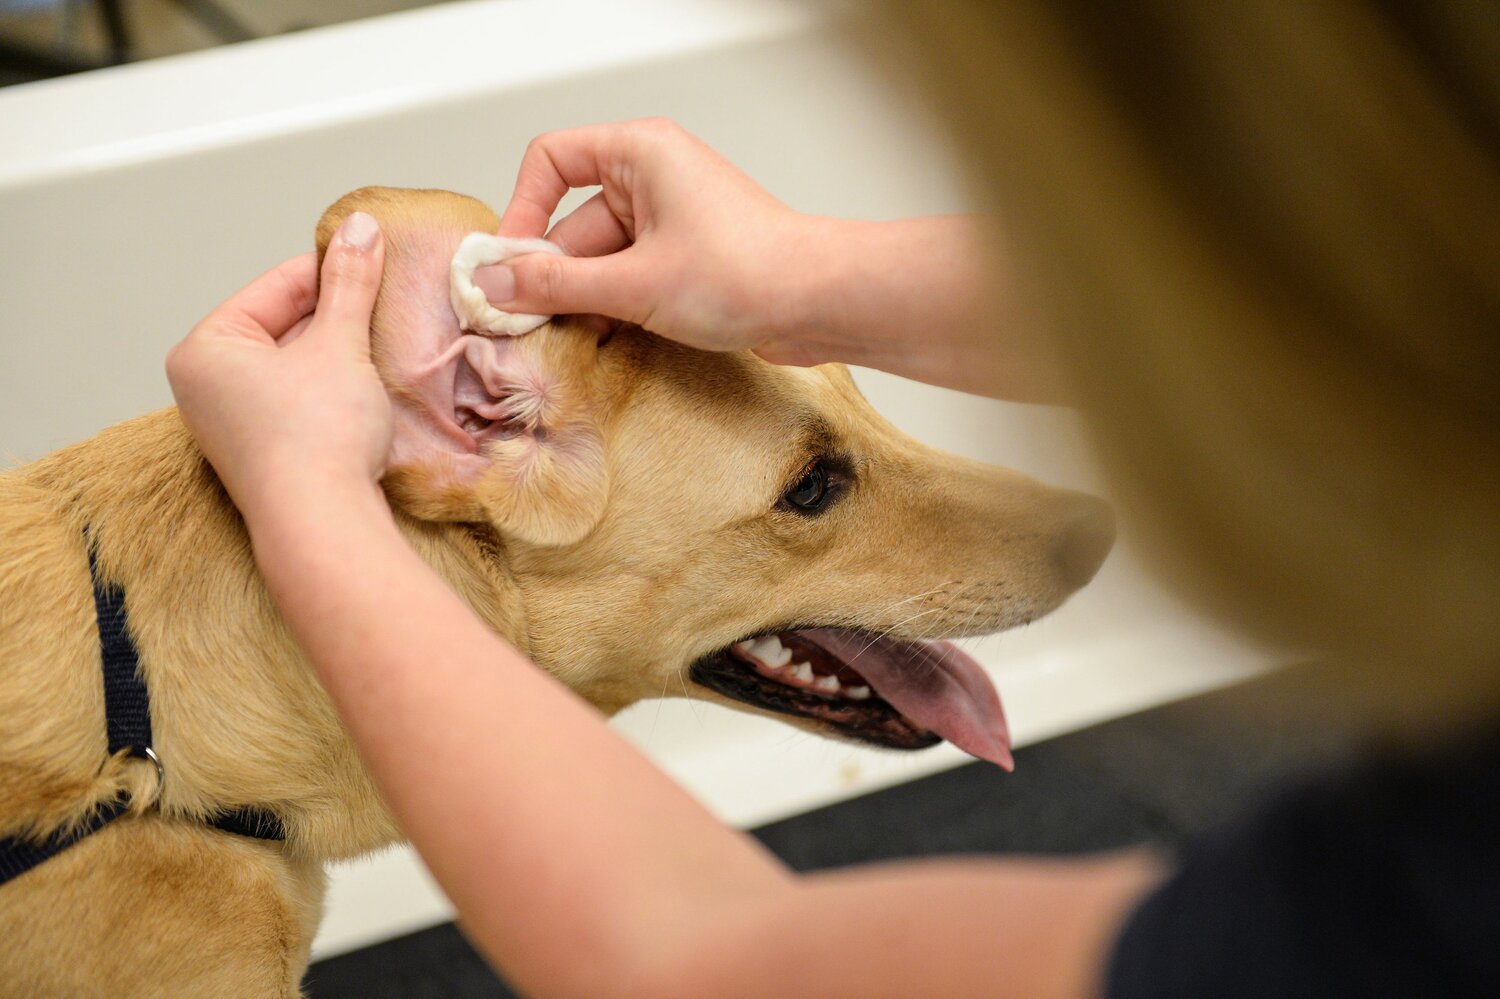 What Symptoms Do Dogs Experience With Ear Infections